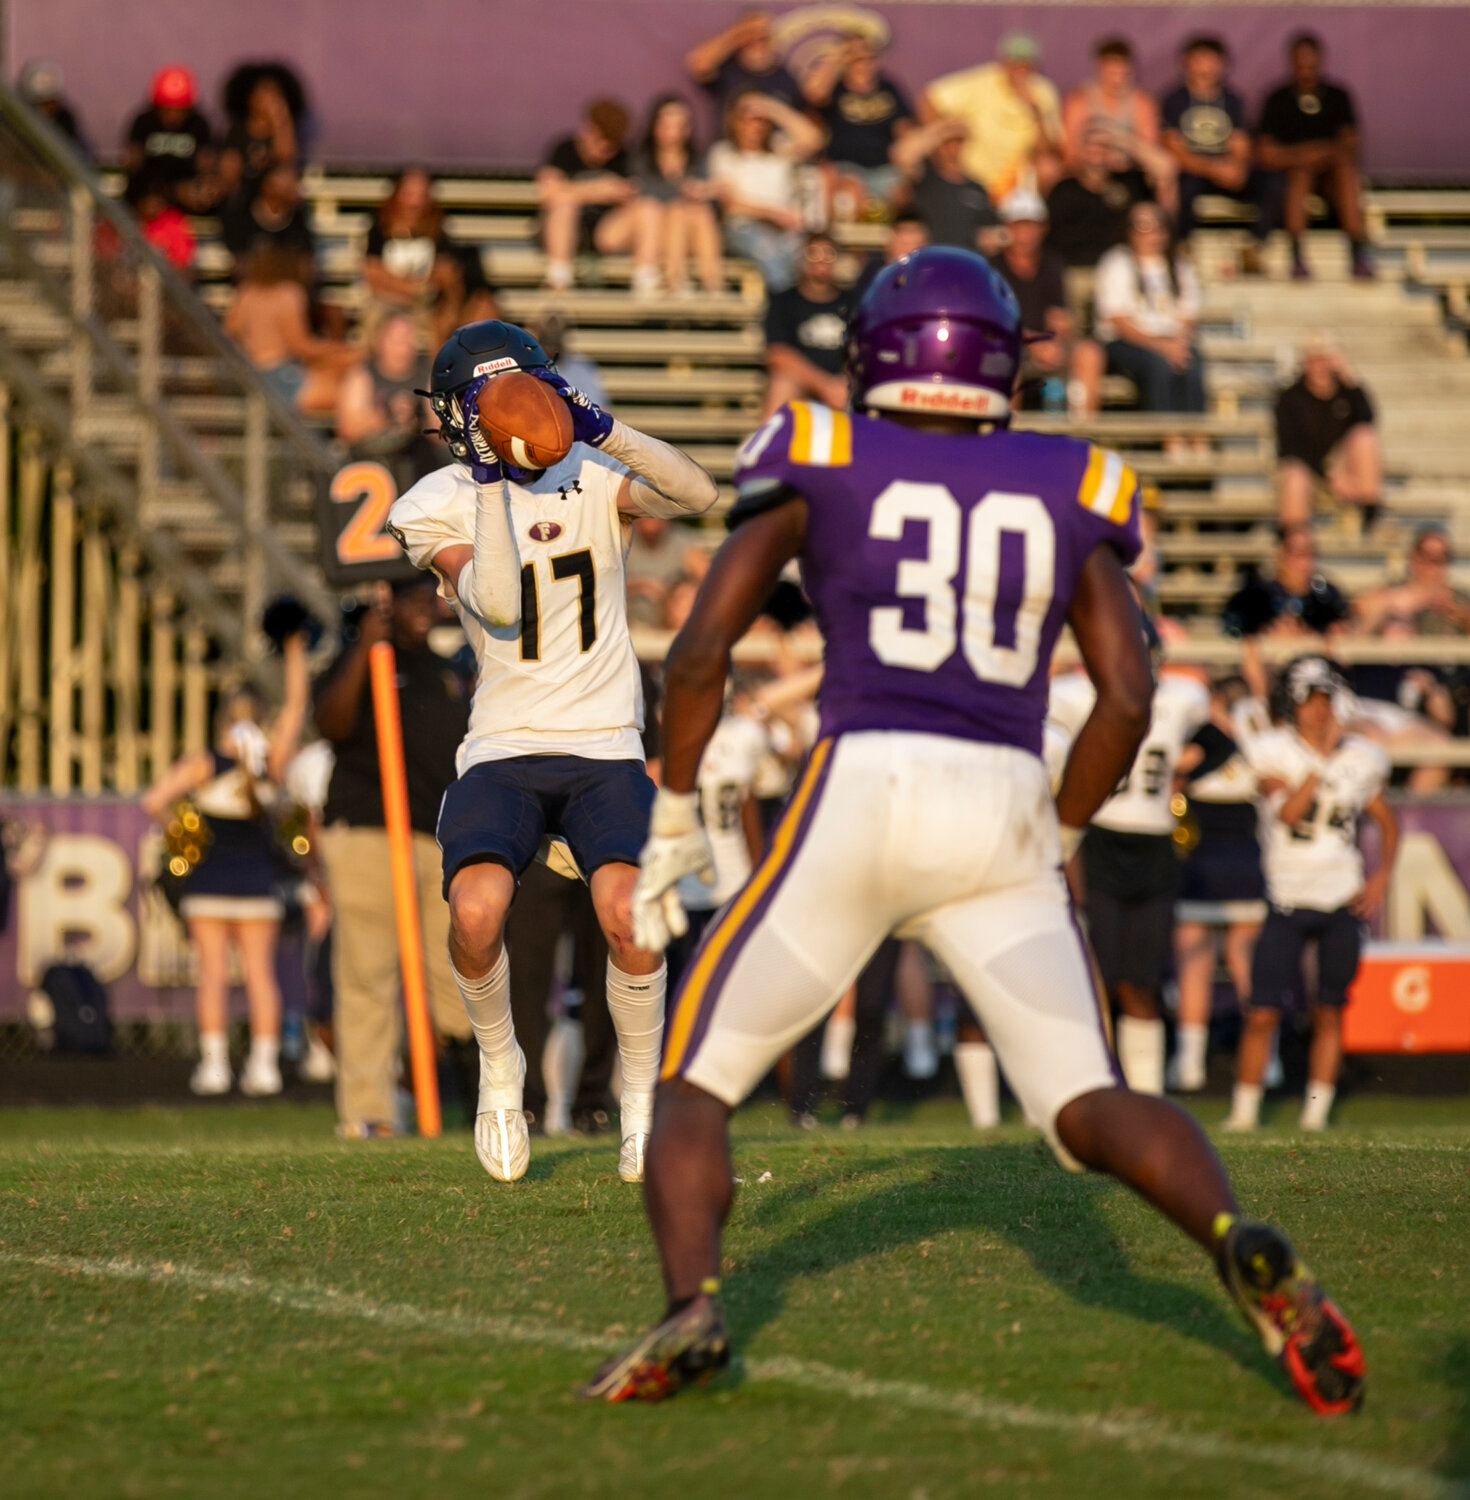 Lion rising junior Cooper Hermecz looks in one of his three catches on Foley’s second scoring drive Friday, May 19, against the Daphne Trojans at Jubilee Stadium.